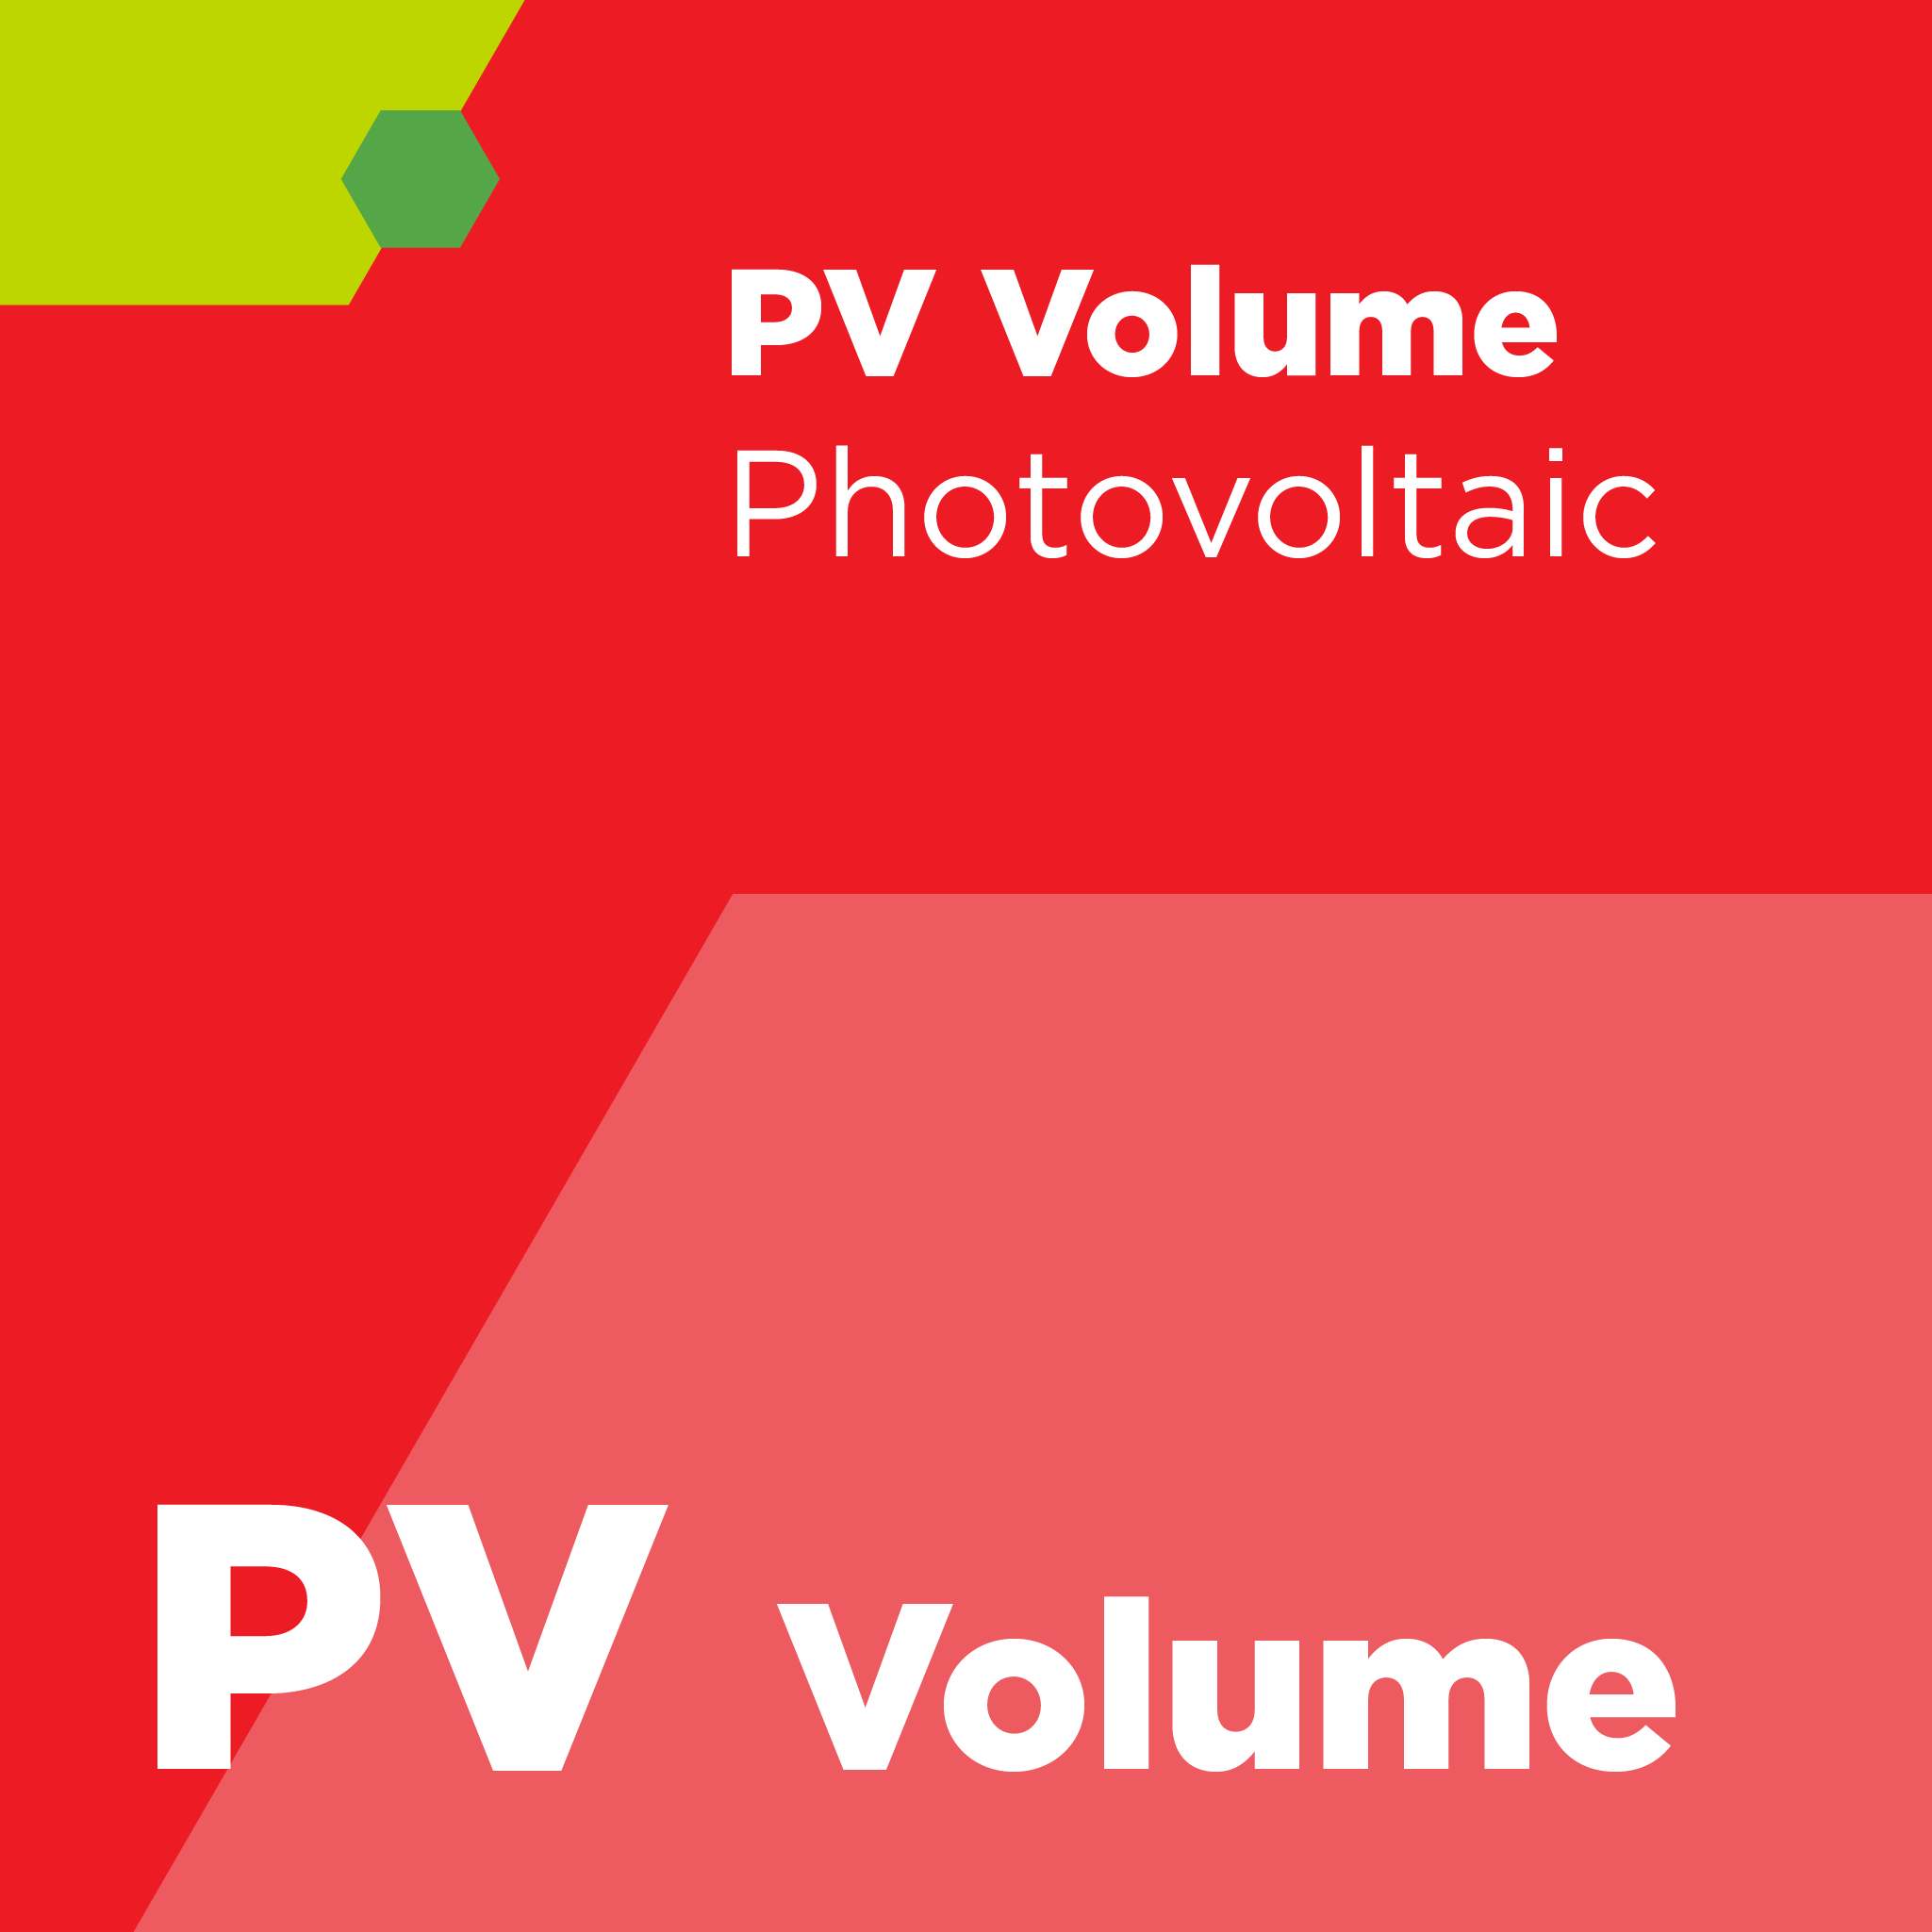 PV0036 - SEMI PV36 - Specification for Hydrogen Peroxide Used in Photovoltaic Applications